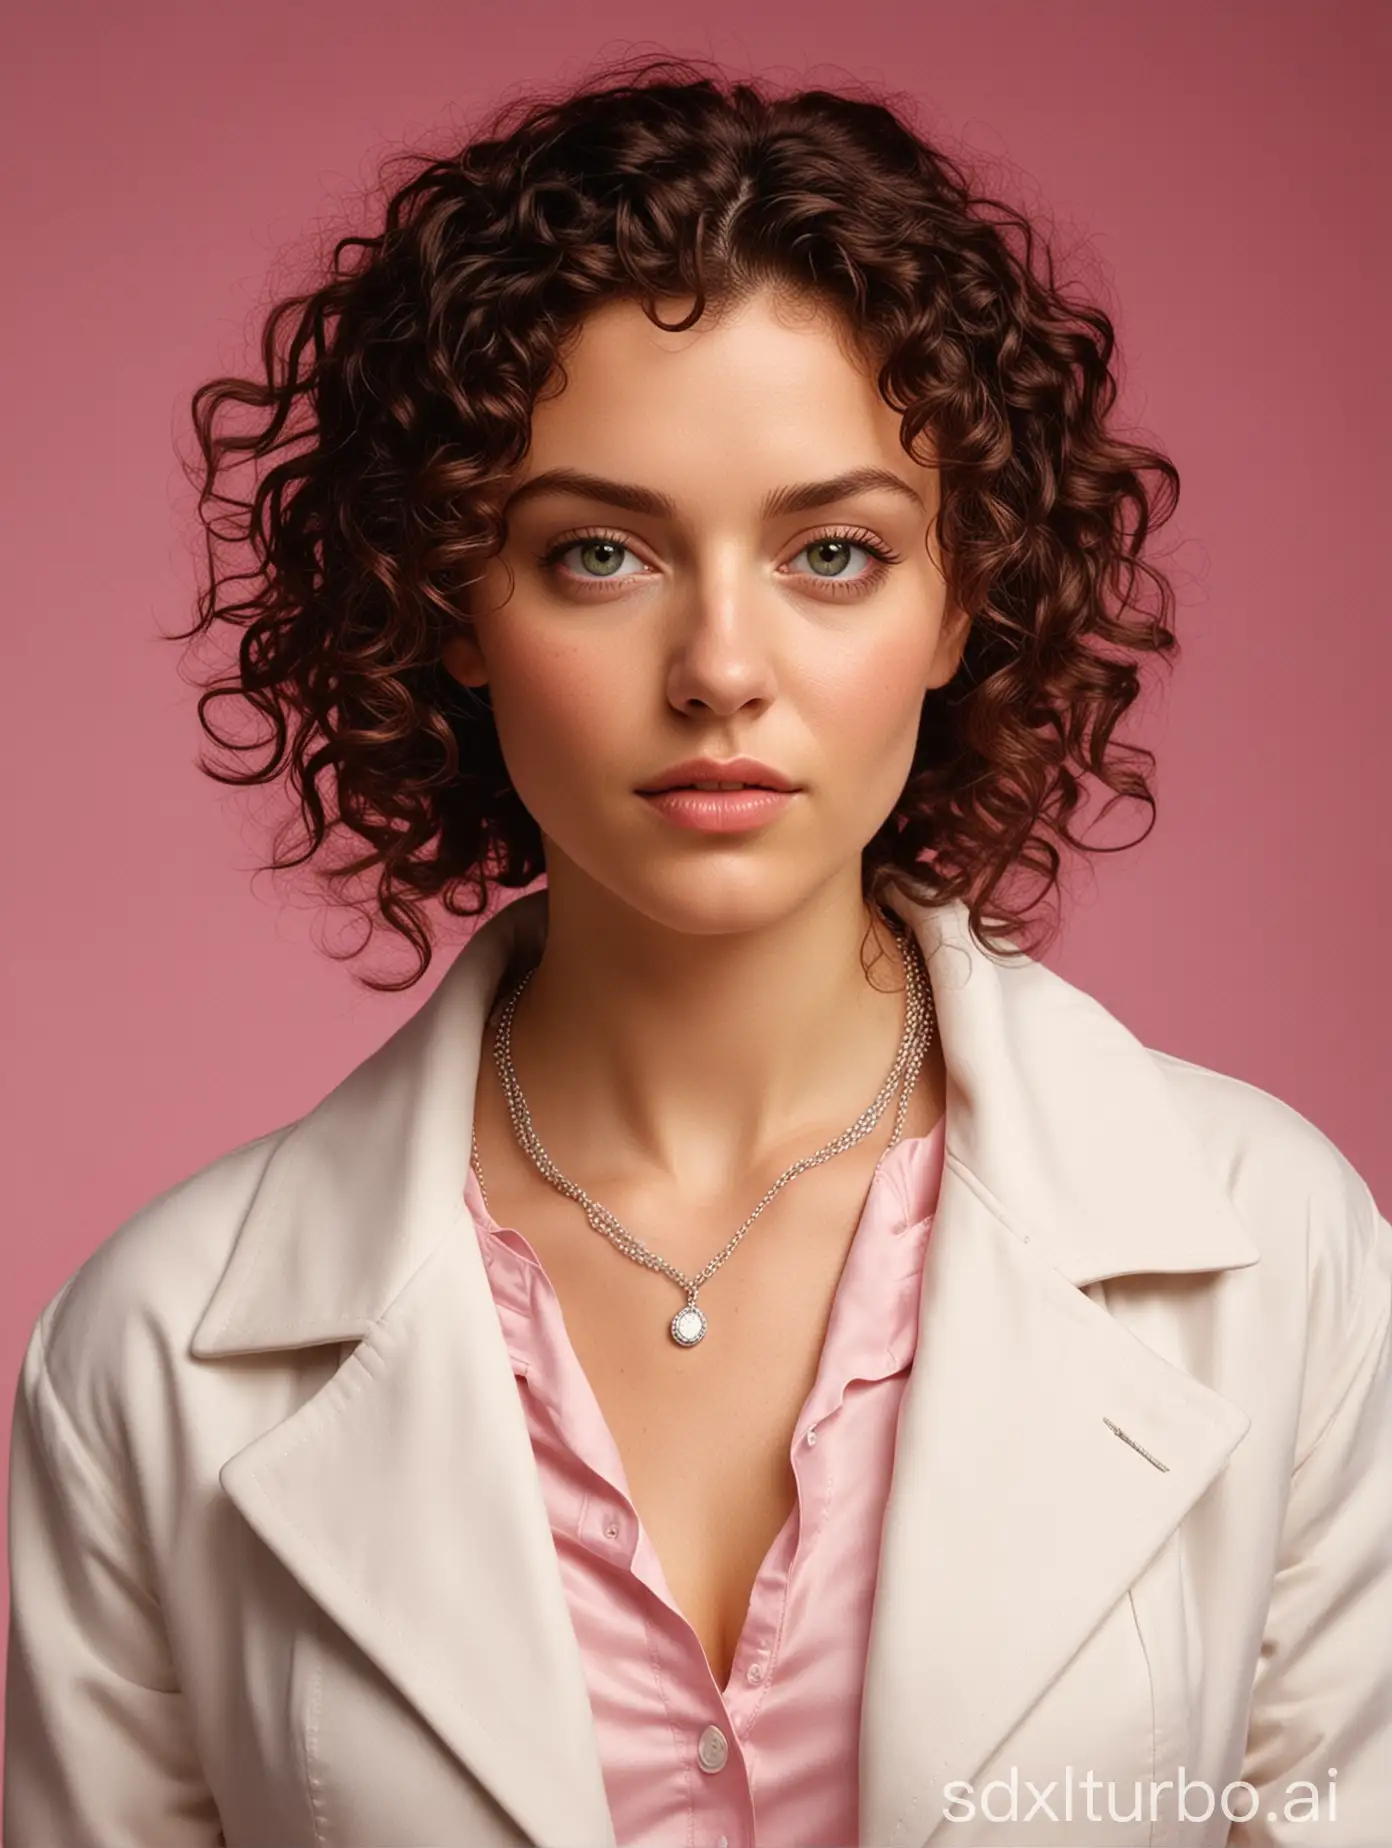 A gorgeous woman with curly hair and green eyes is posing in front of a pink background. She is wearing a white jacket and has a silver necklace on. She is looking at the camera with a serious expression., in the style of Annie Leibovitz